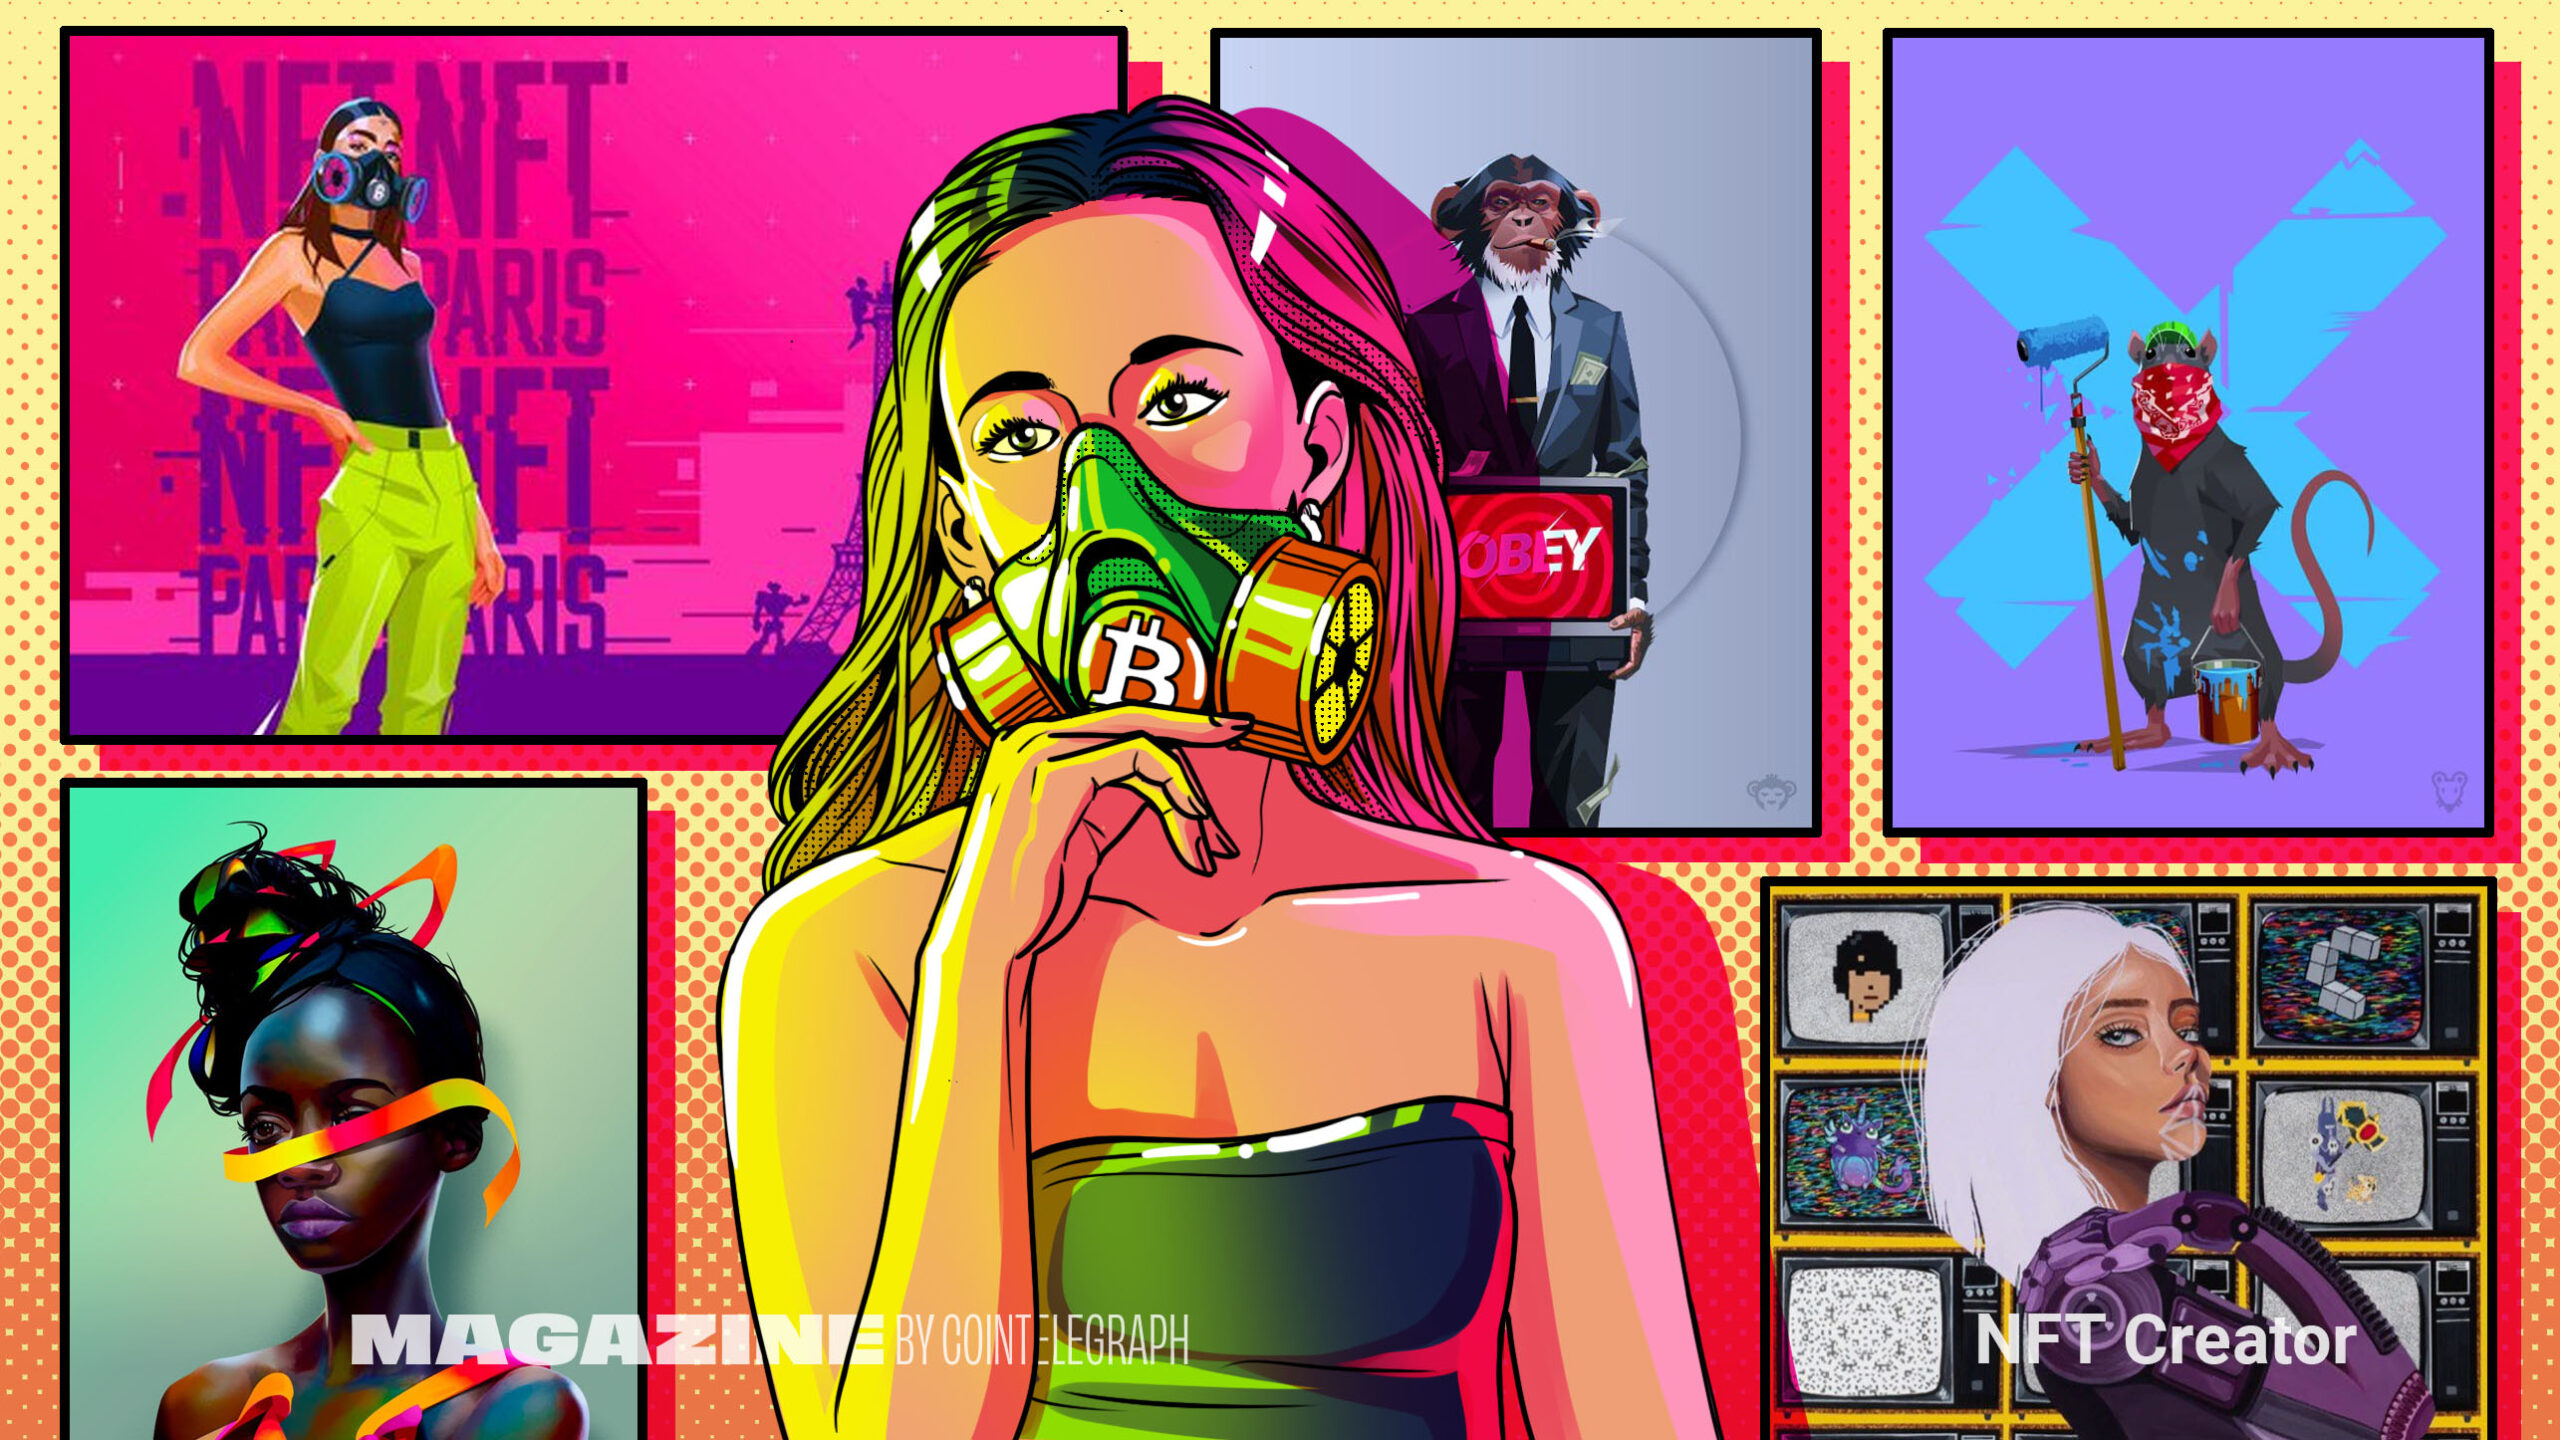 From Finance to Crypto Art: The Journey of Josie Bellini